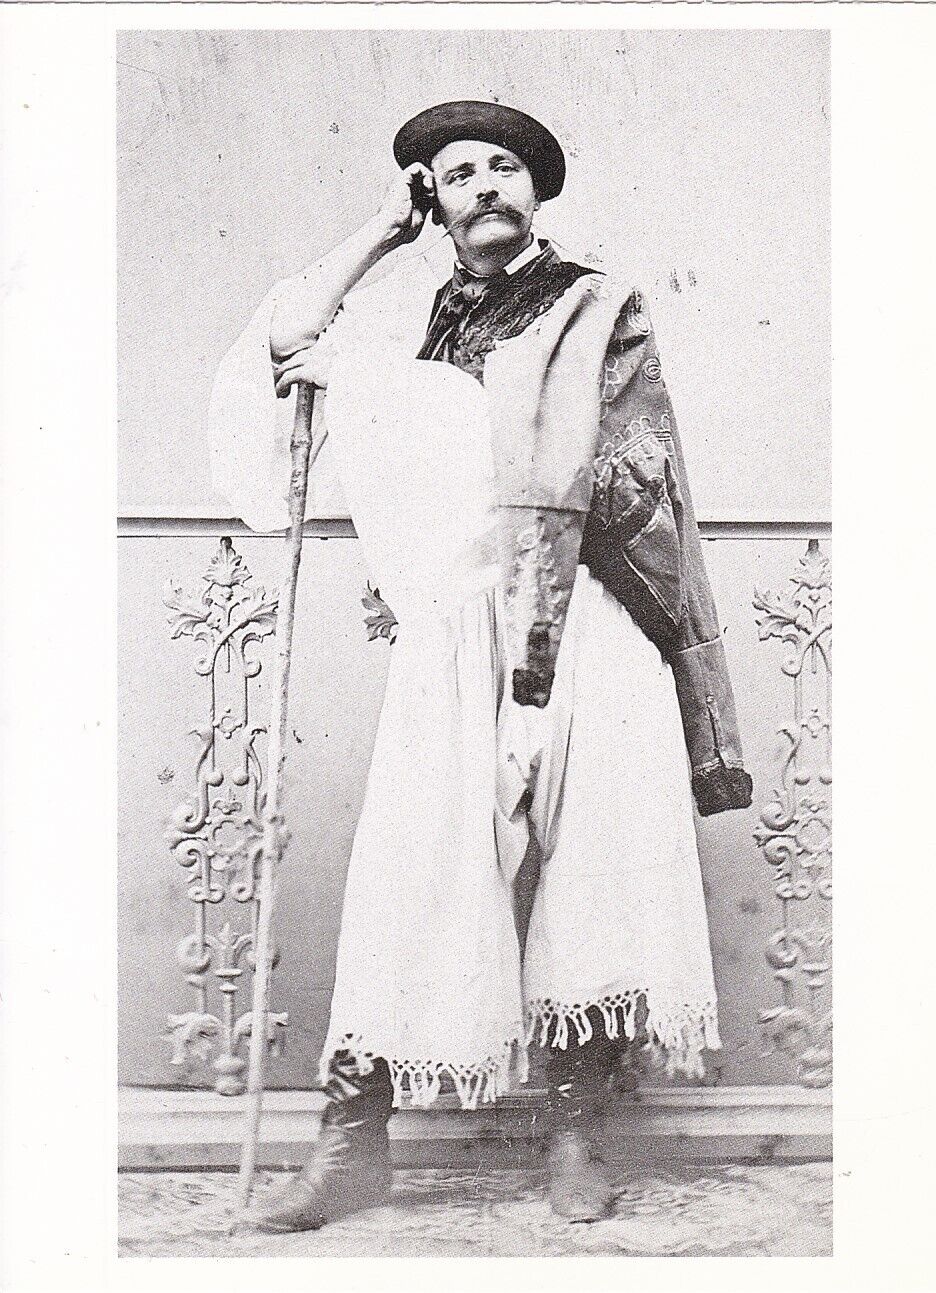 Hungarian Man in the 1860s, Repro From Old Photo, Unused, Published 1991, WOB